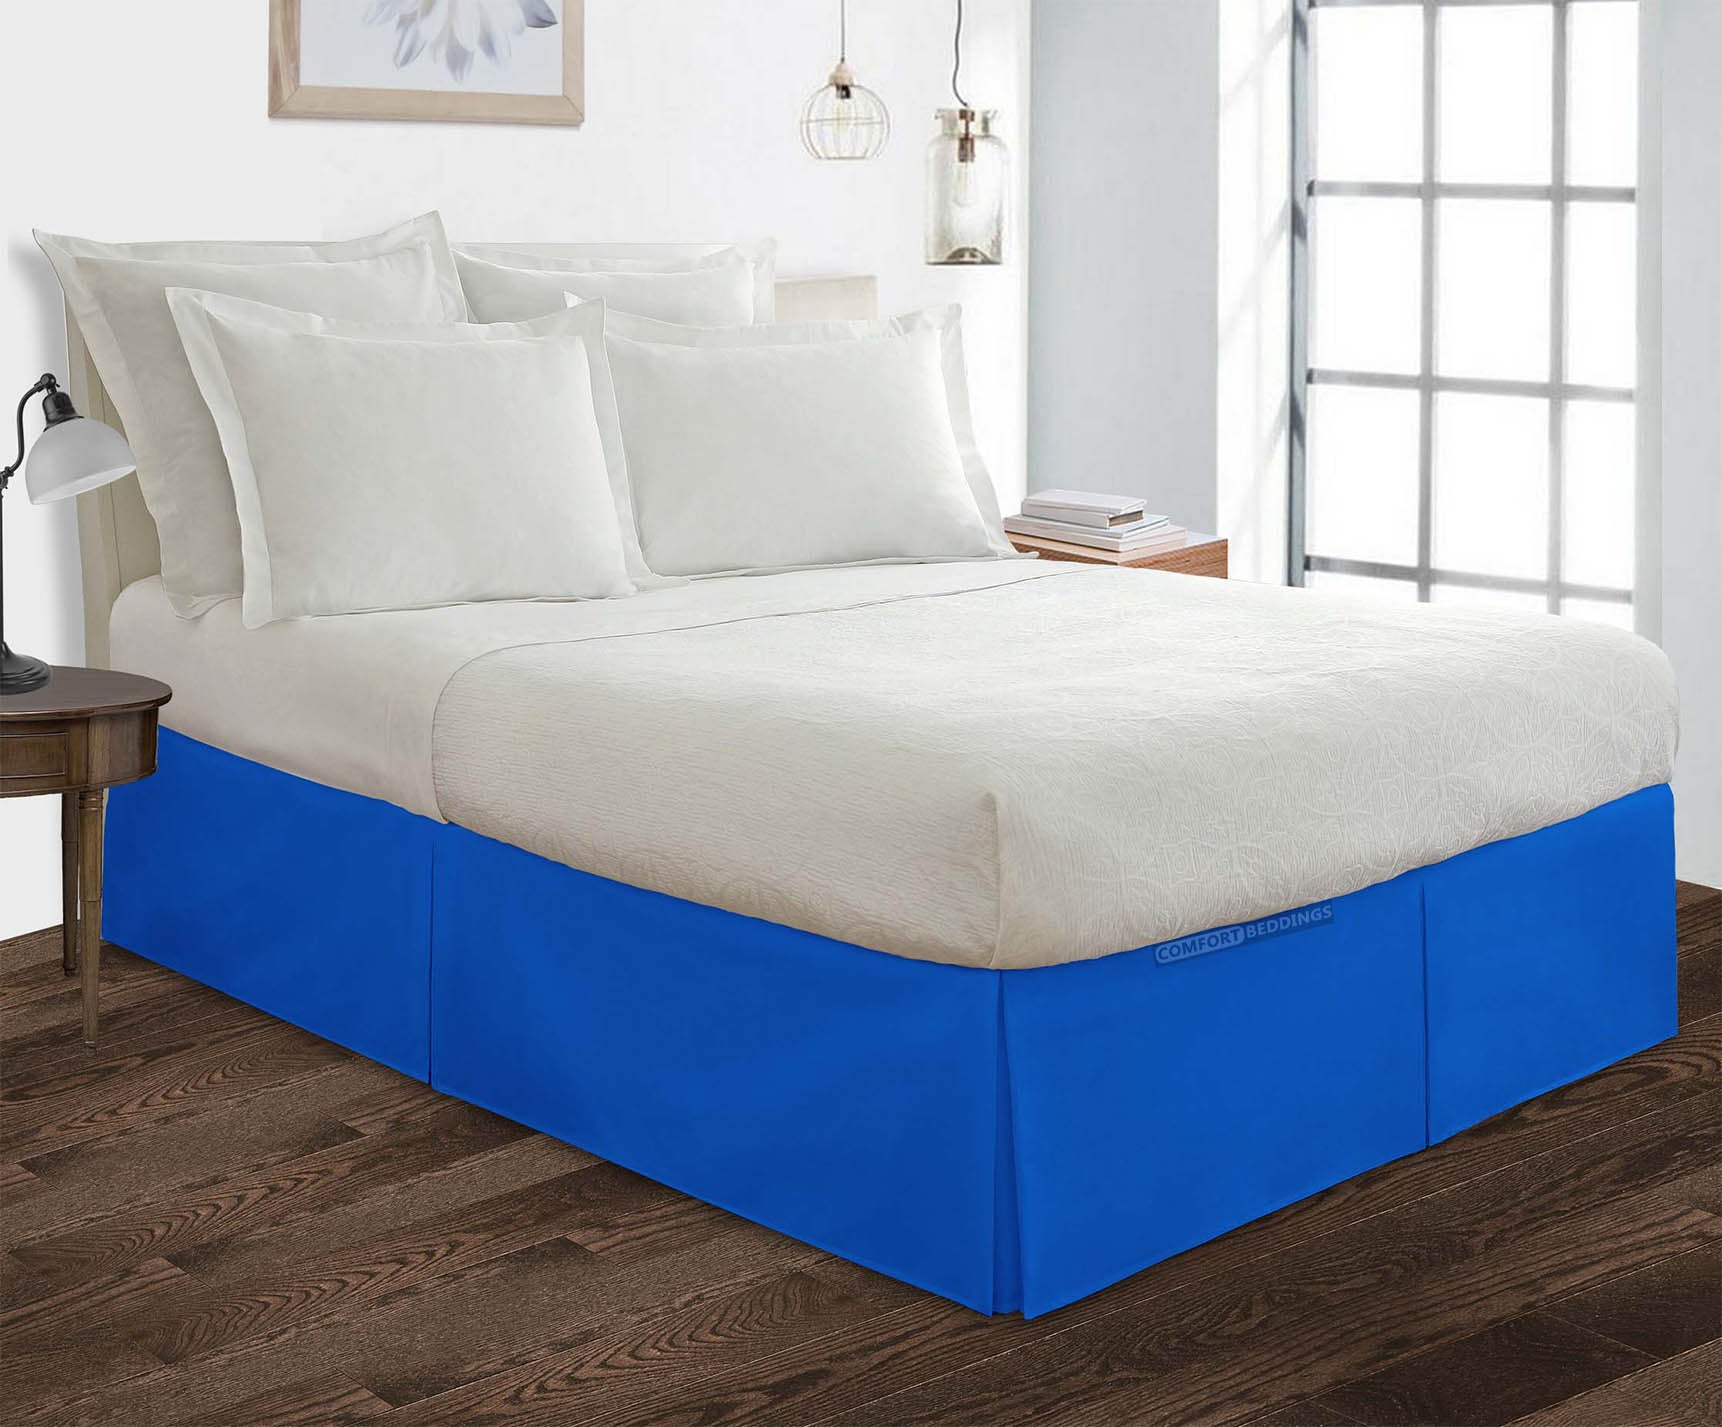 Royal Blue Pleated bed skirts